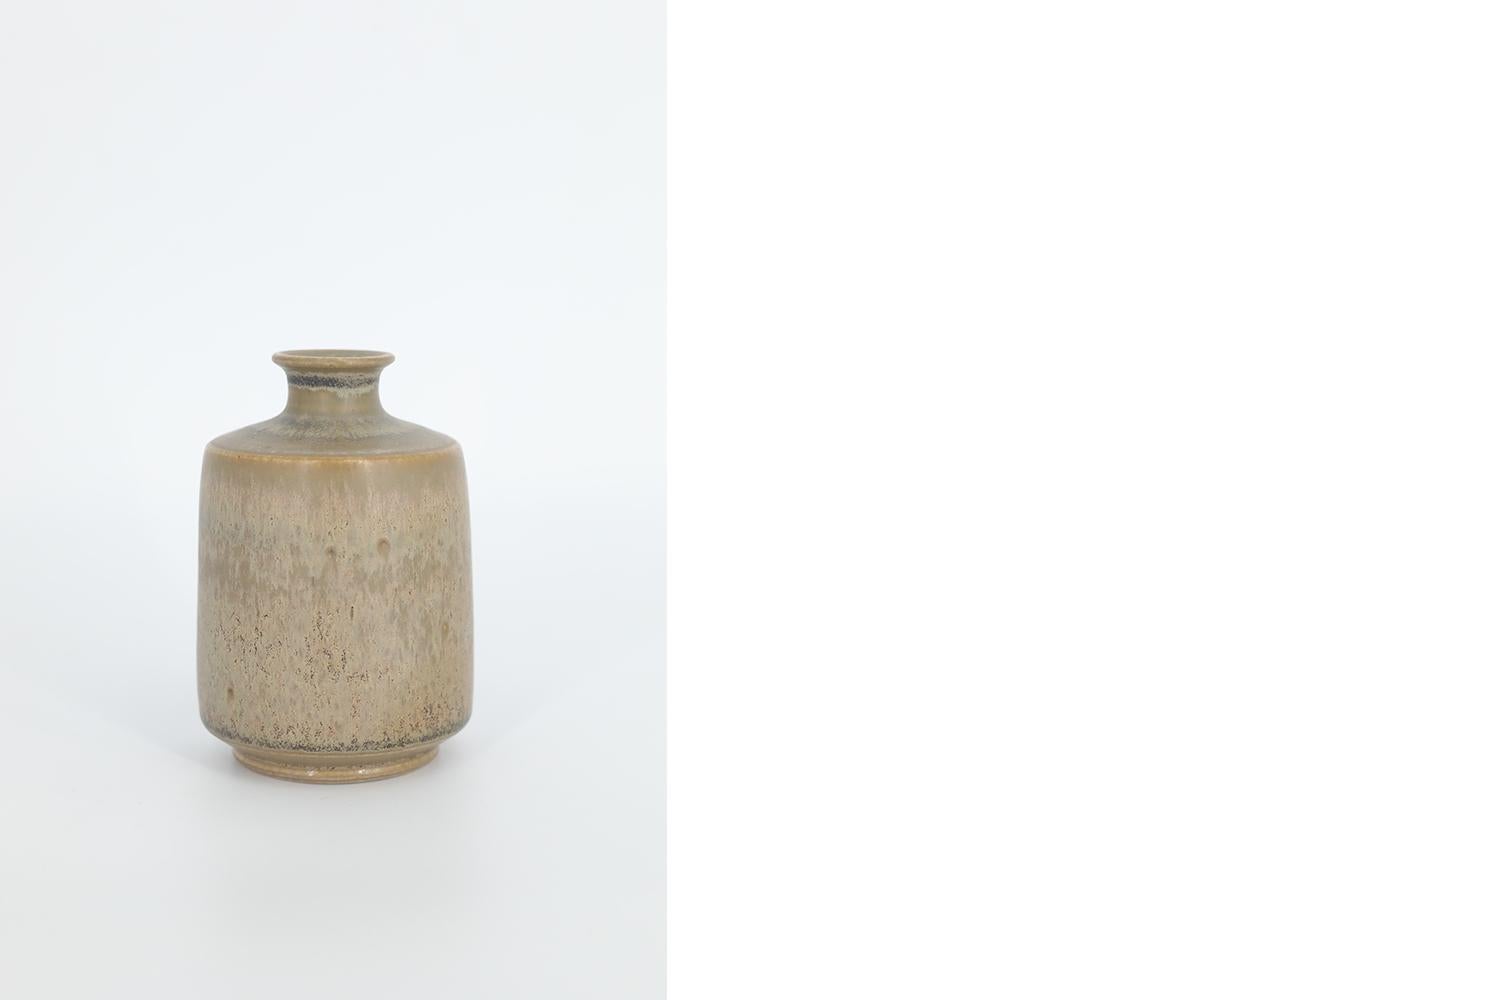 This miniature, collectible stoneware vase was designed by Gunnar Borg for the Swedish manufacture Höganäs Keramik during the 1960s. Handmade by a Master, with the utmost care and attention to details. The vase dyed brown in an irregular shade.